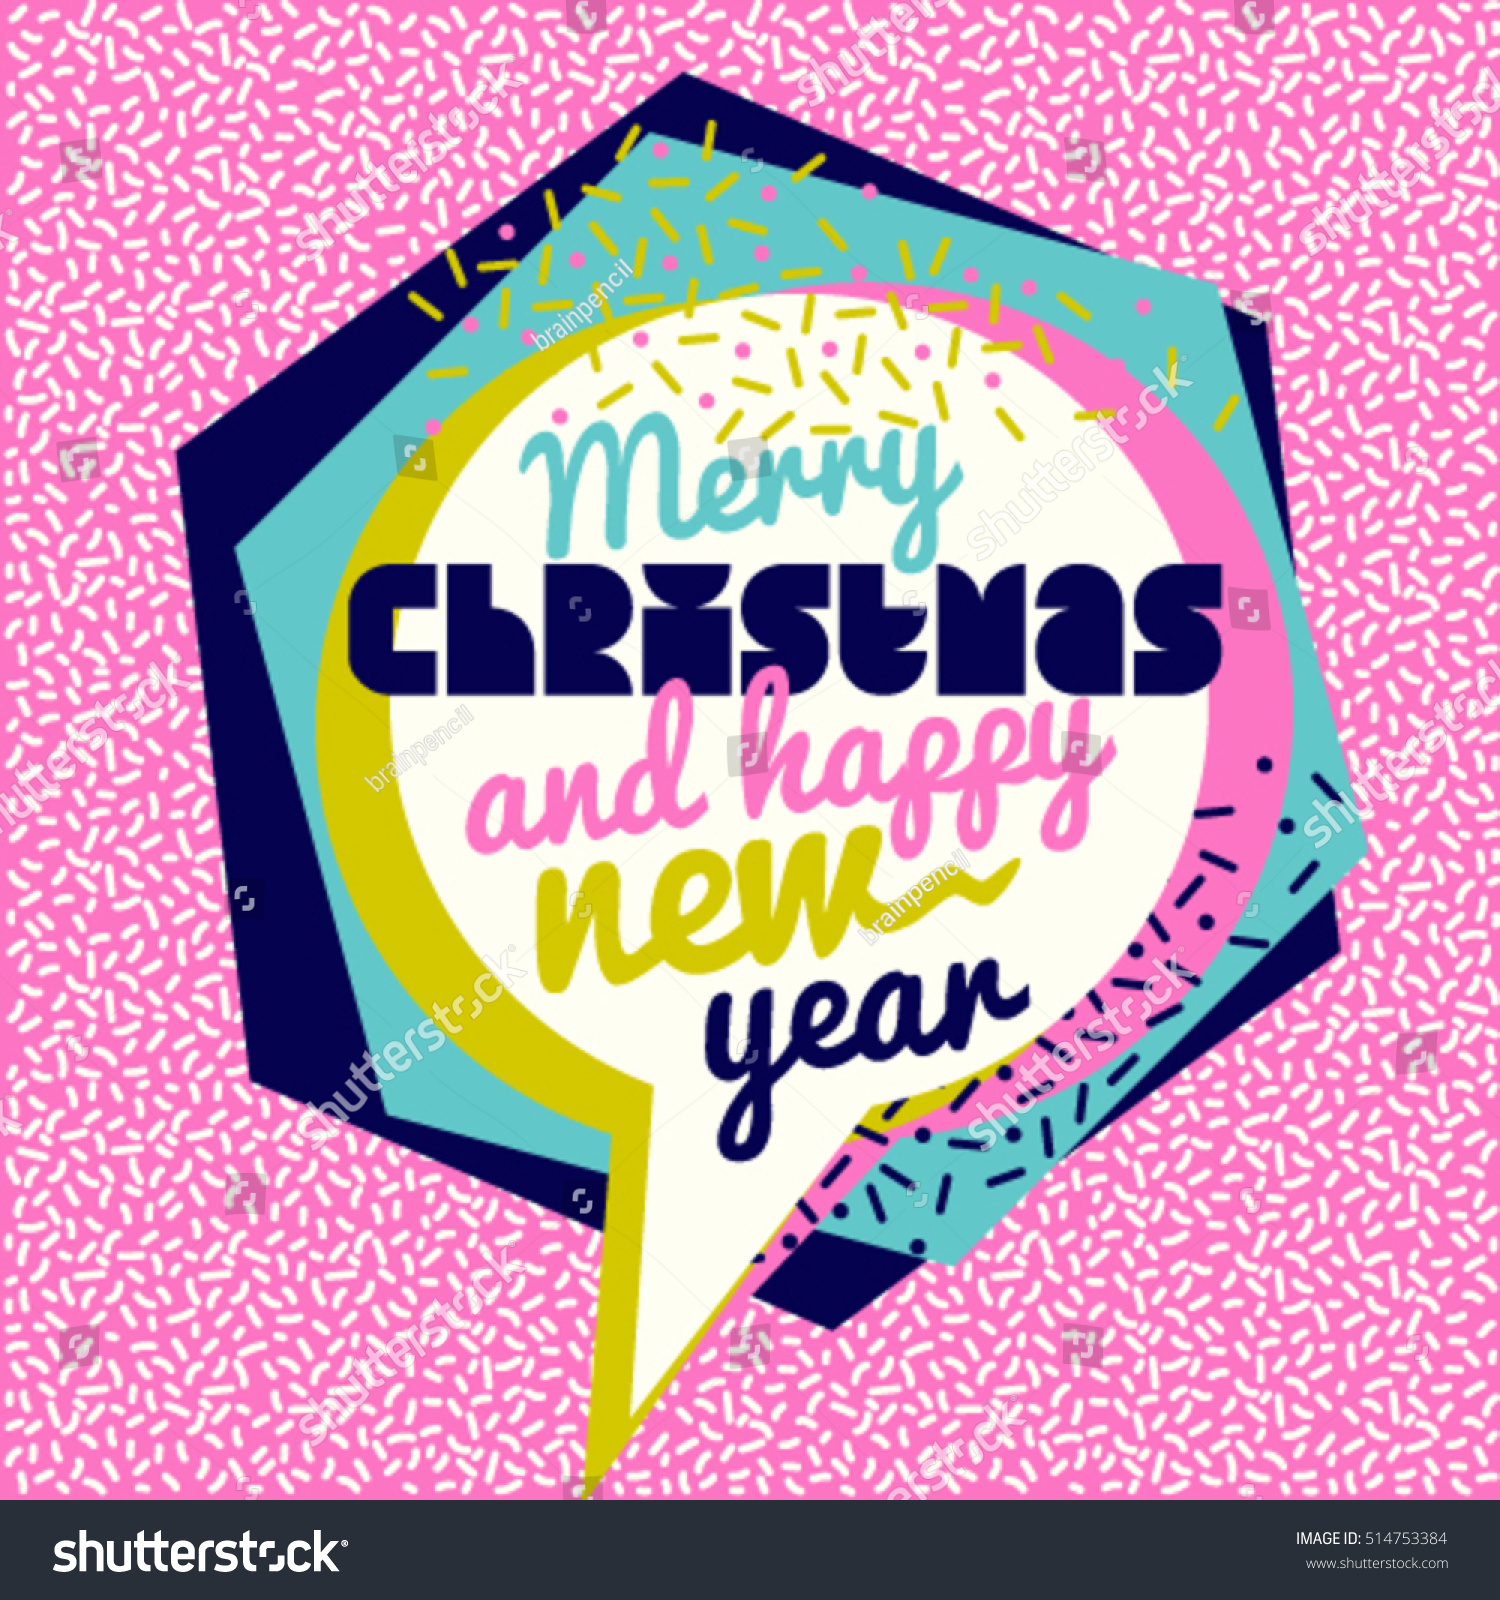 Memphis style Merry Christmas and Happy New Year greeting card 80 s 90 s style vector